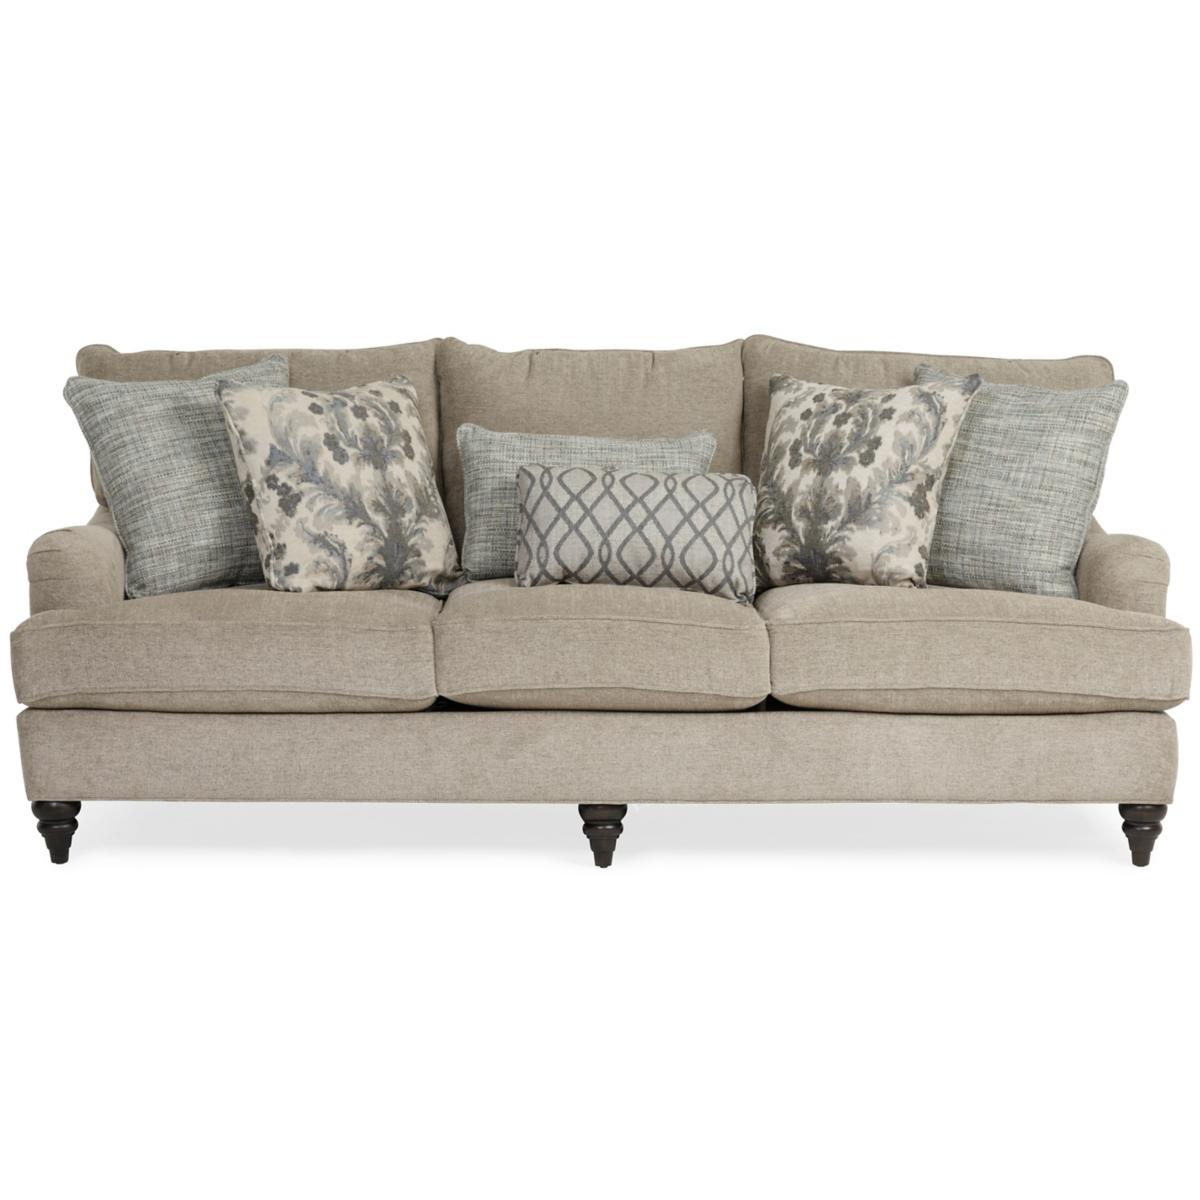 Shelby 3-Seat Sofa | Star Furniture